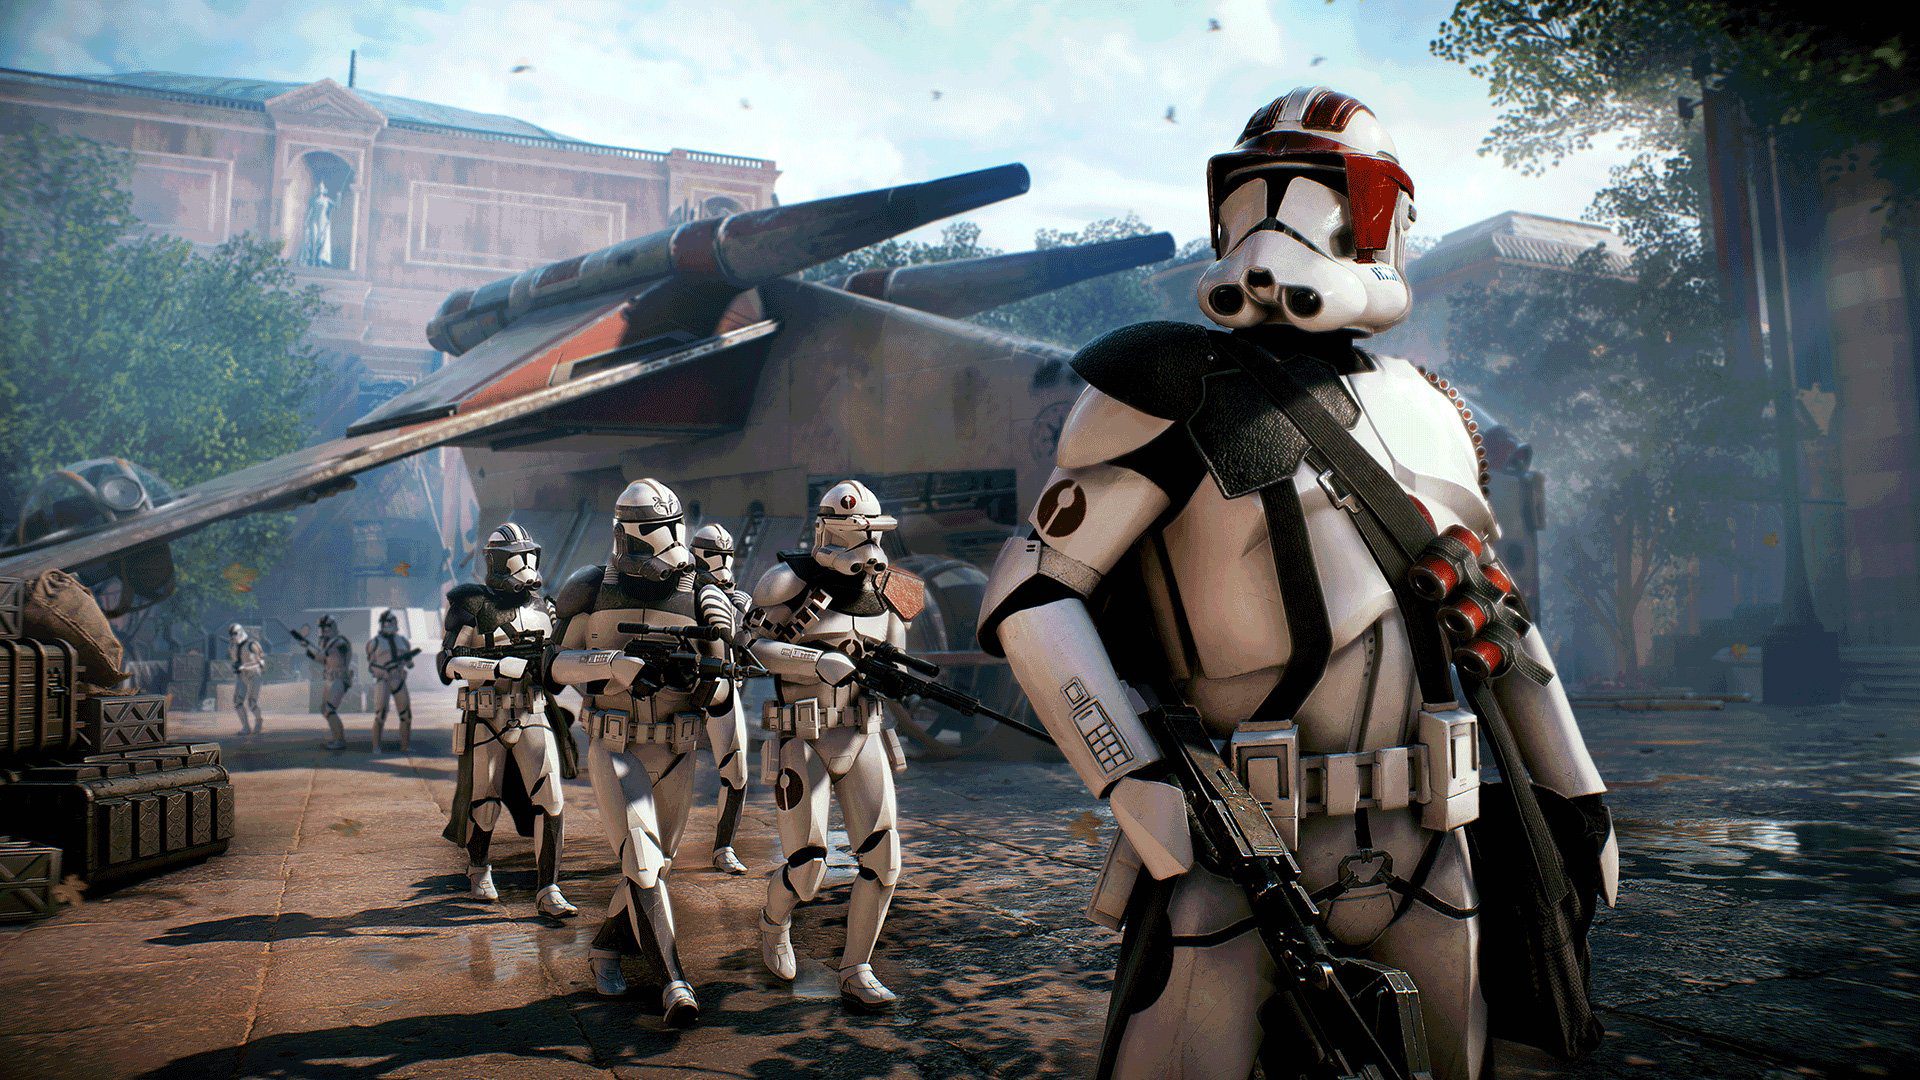 Star Wars Battlefront 2: Celebration Edition is free on the Epic Store